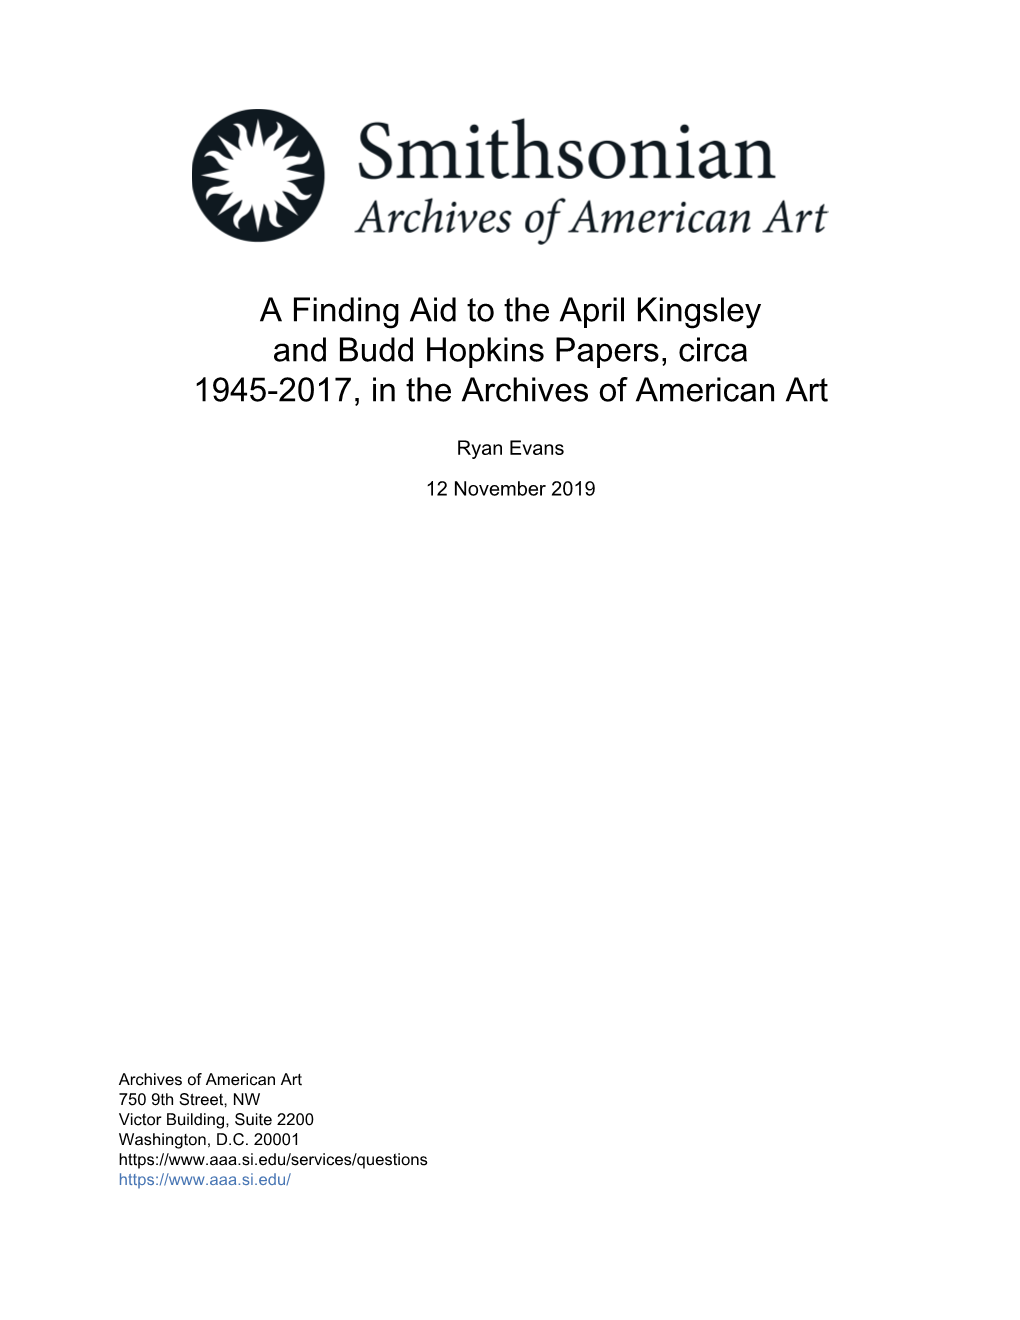 A Finding Aid to the April Kingsley and Budd Hopkins Papers, Circa 1945-2017, in the Archives of American Art